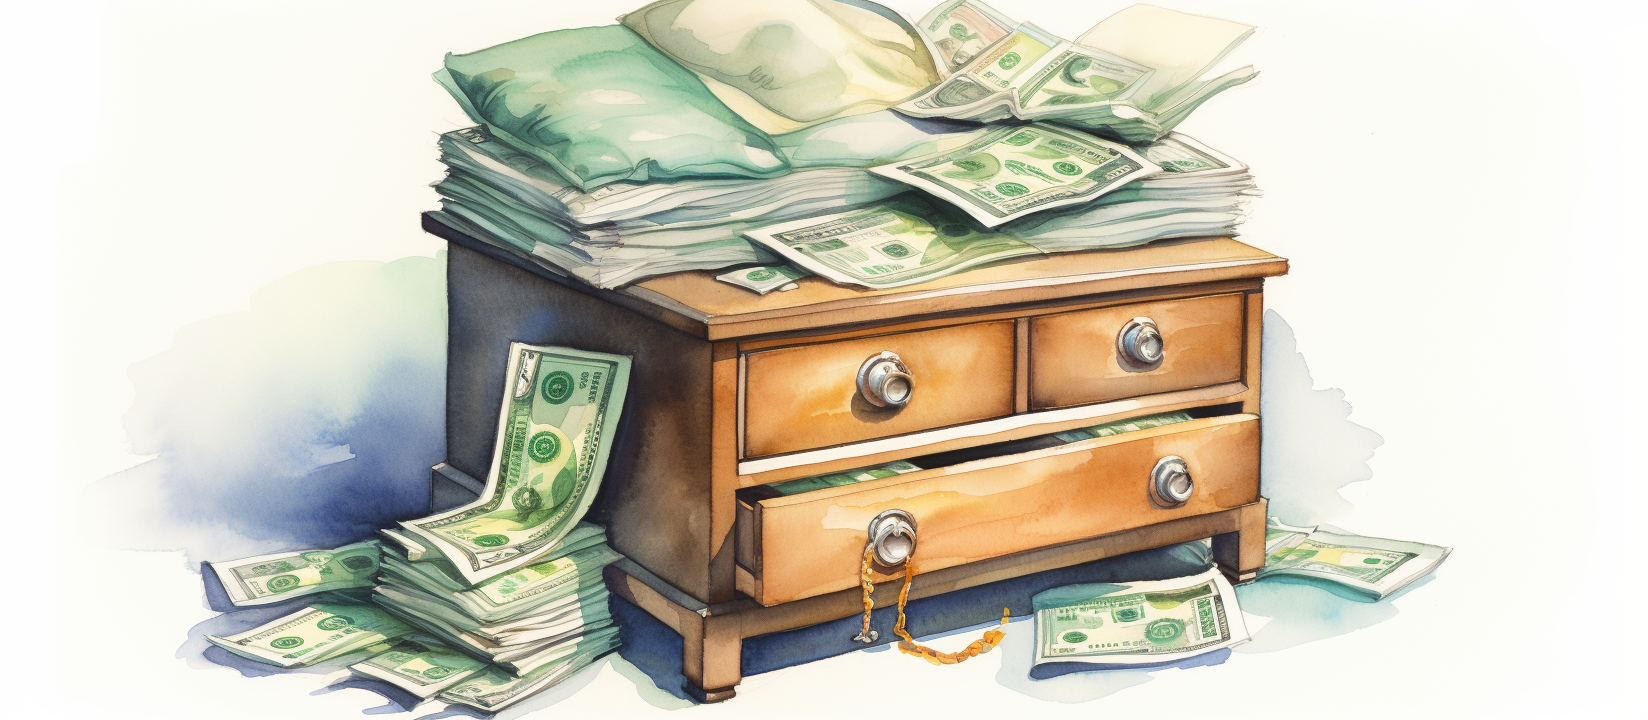 a_nightstand_with_money_sticking_out_of_it_wat_9390f403-10f5-488c-bb9b-d4310a846879.png